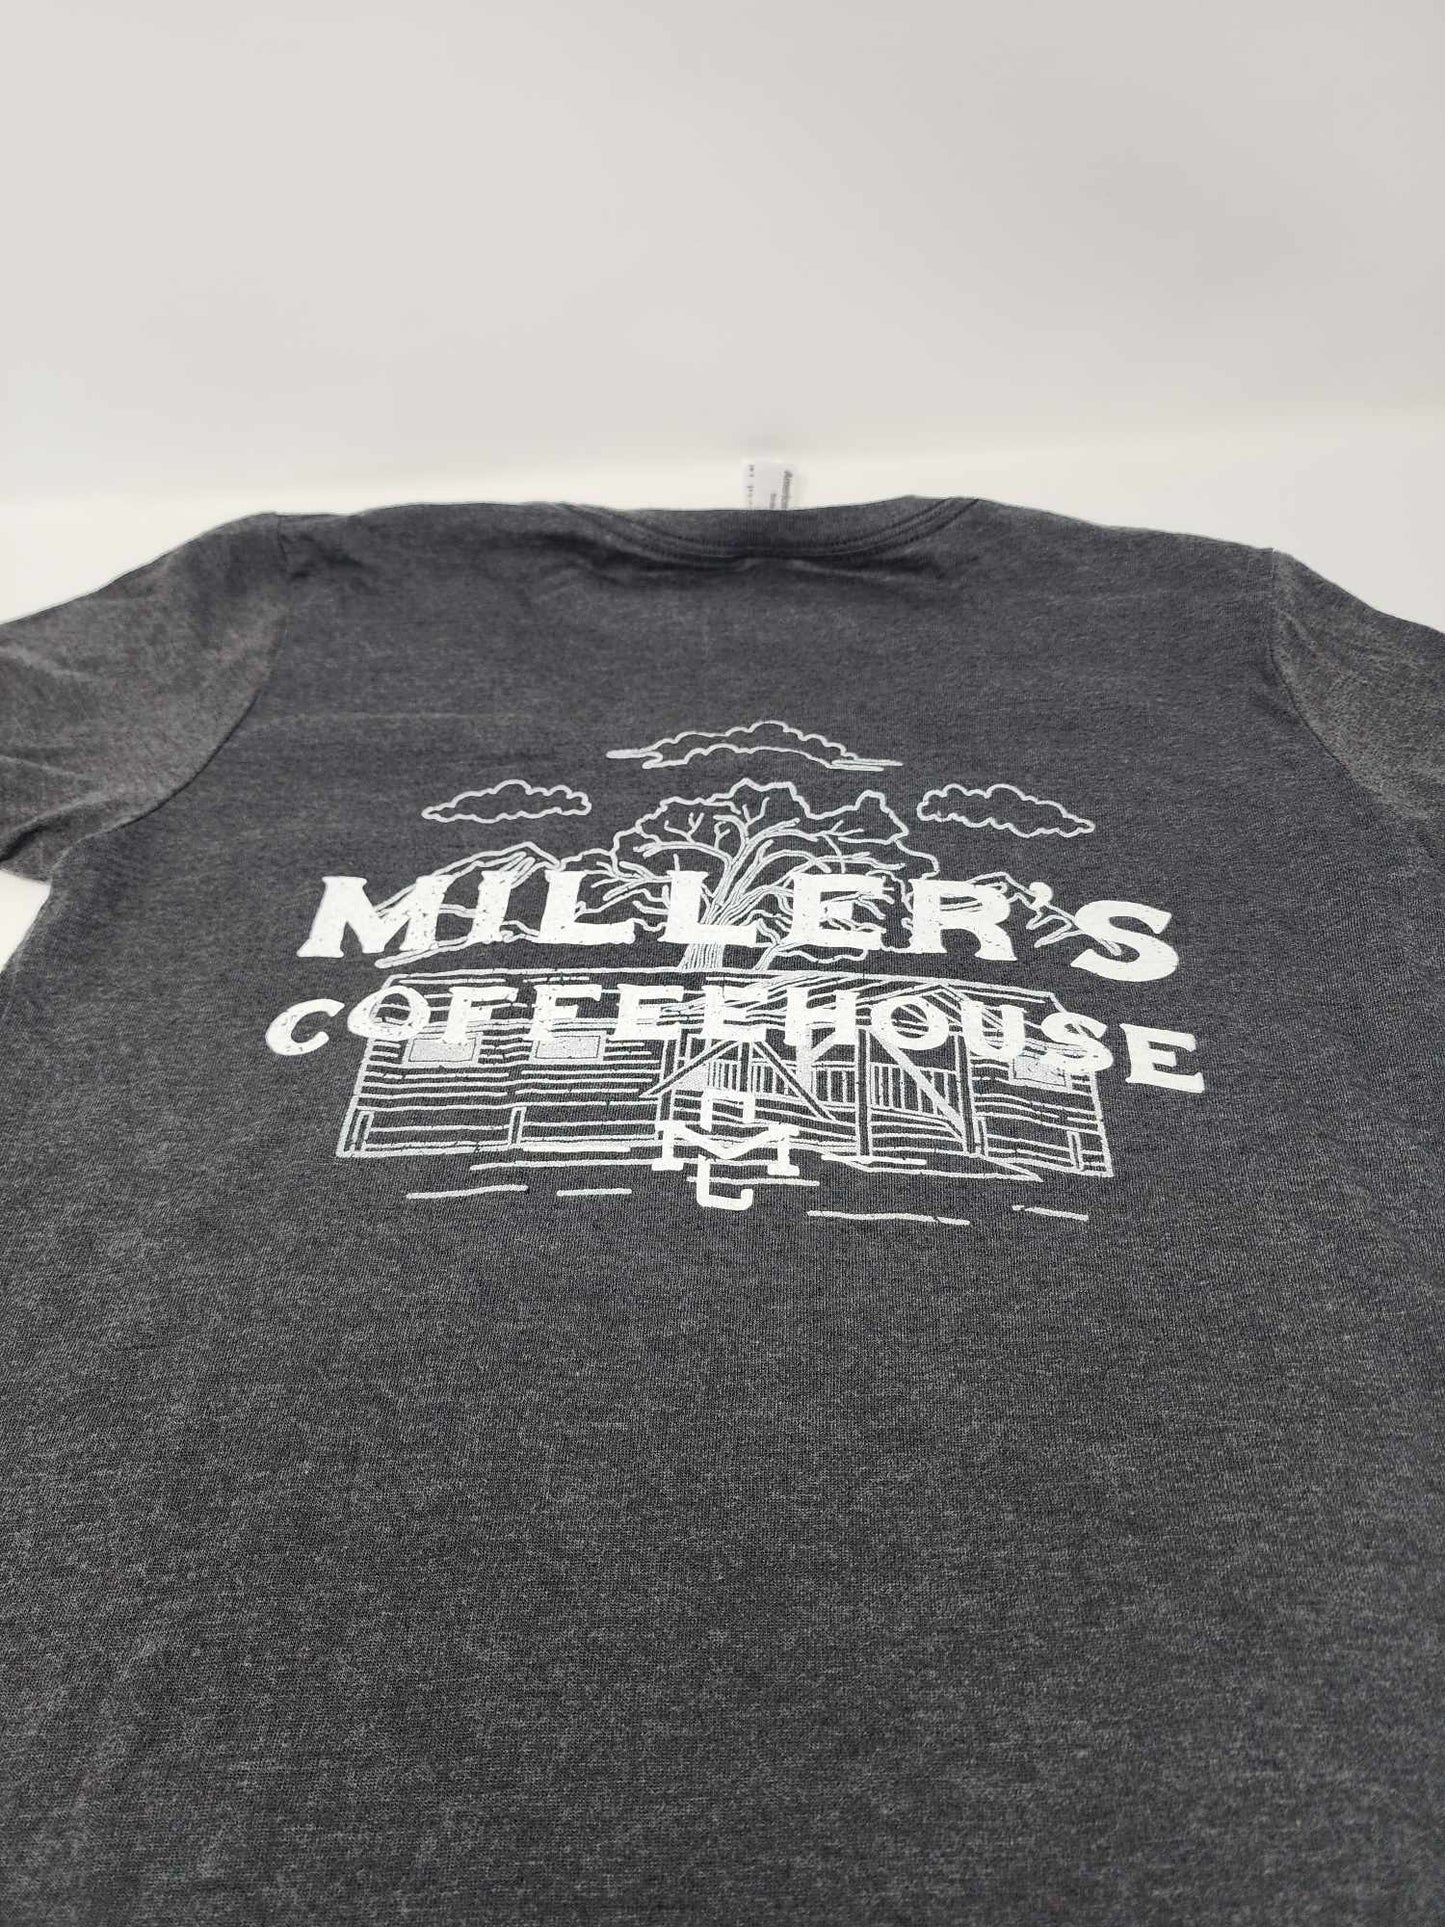 Miller's Coffee house T shirts